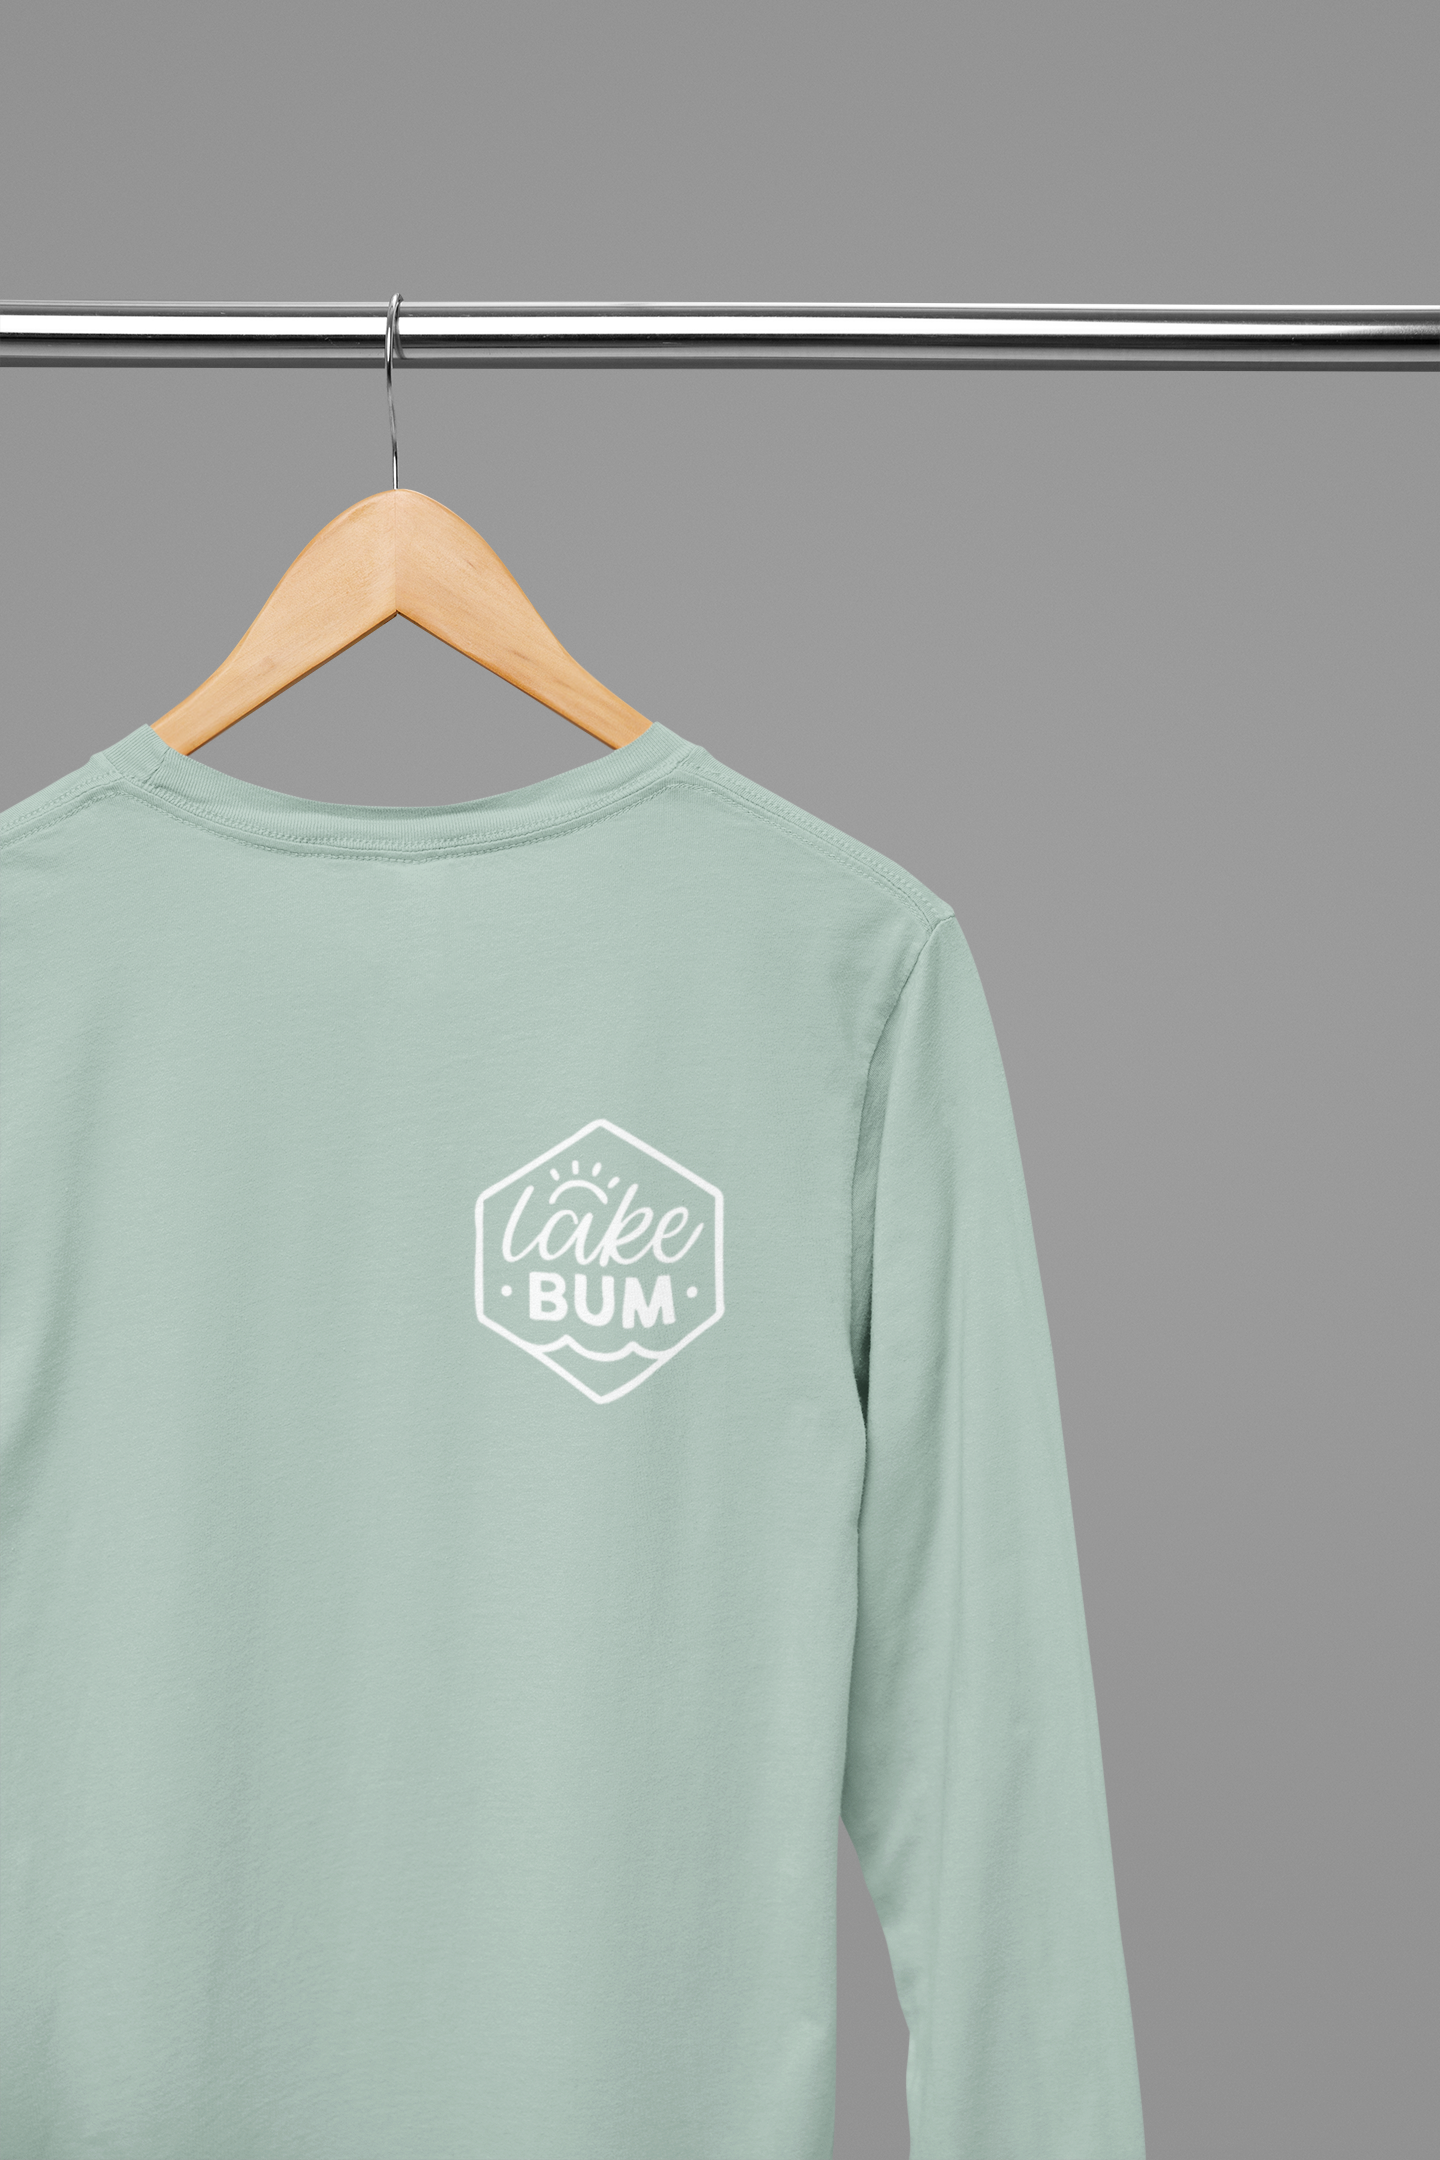 Life is Better at the Lake - Long Sleeve T-Shirt in heather dusty blue. The back of the shirt has a white design with the saying "Life is better at the lake" with lake waves, pine trees, and a loon all squared into a frame. The front has the saying "lake bum" with a lake wave and sun all boxed into a hexagon on the small square pocket (right). This is the front view of the shirt, hanging on a natural wooden hanger hanging on a clothing rack.